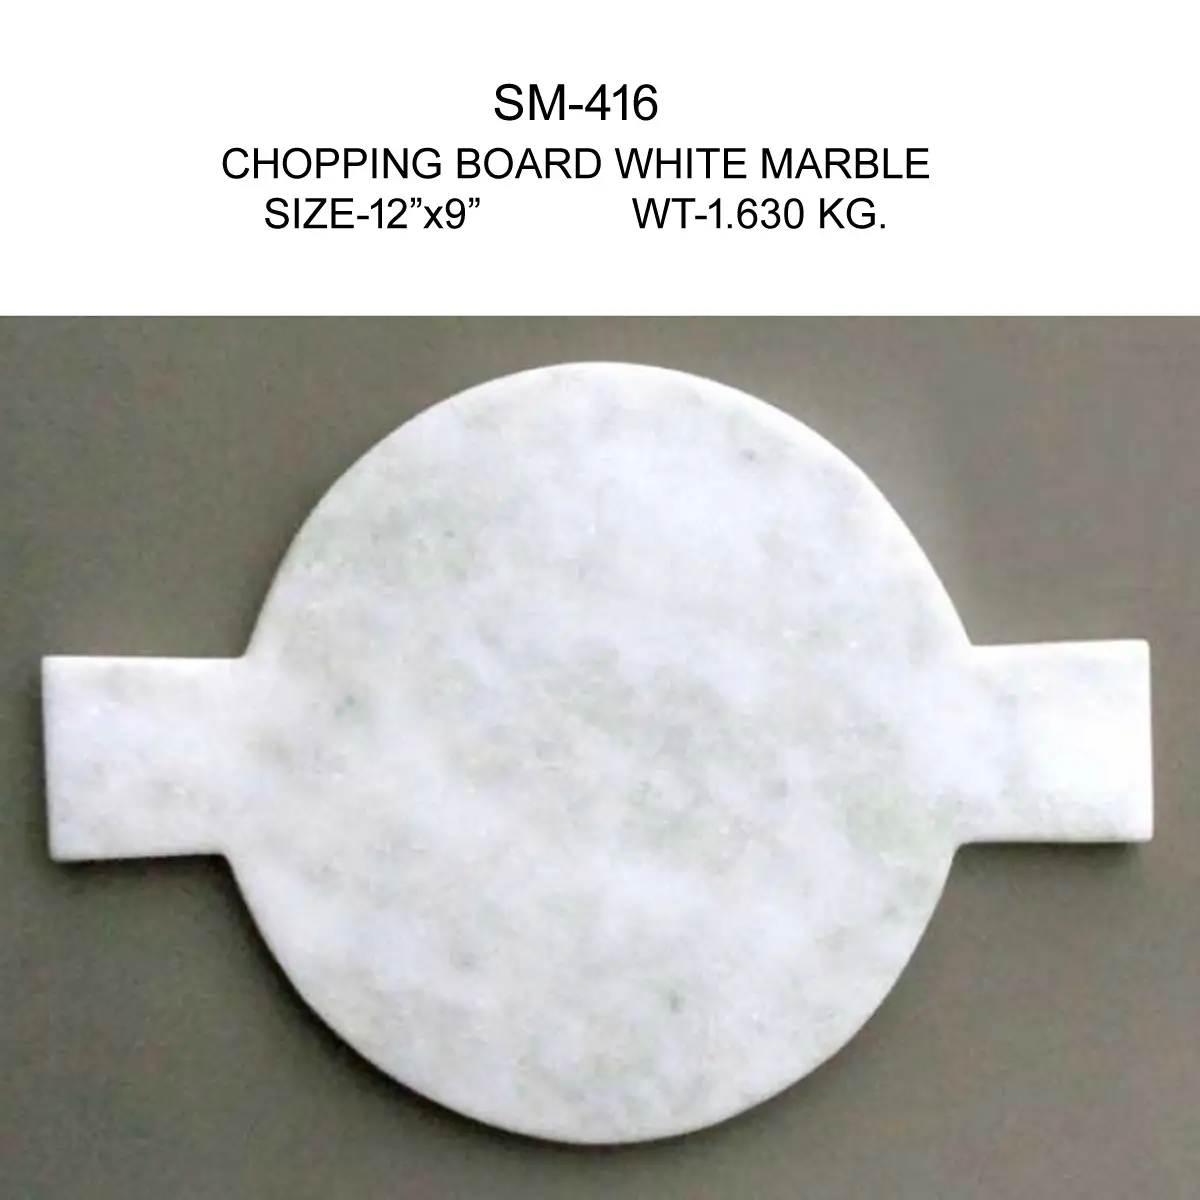 CHOPPING BOARD WHITE MARBLE